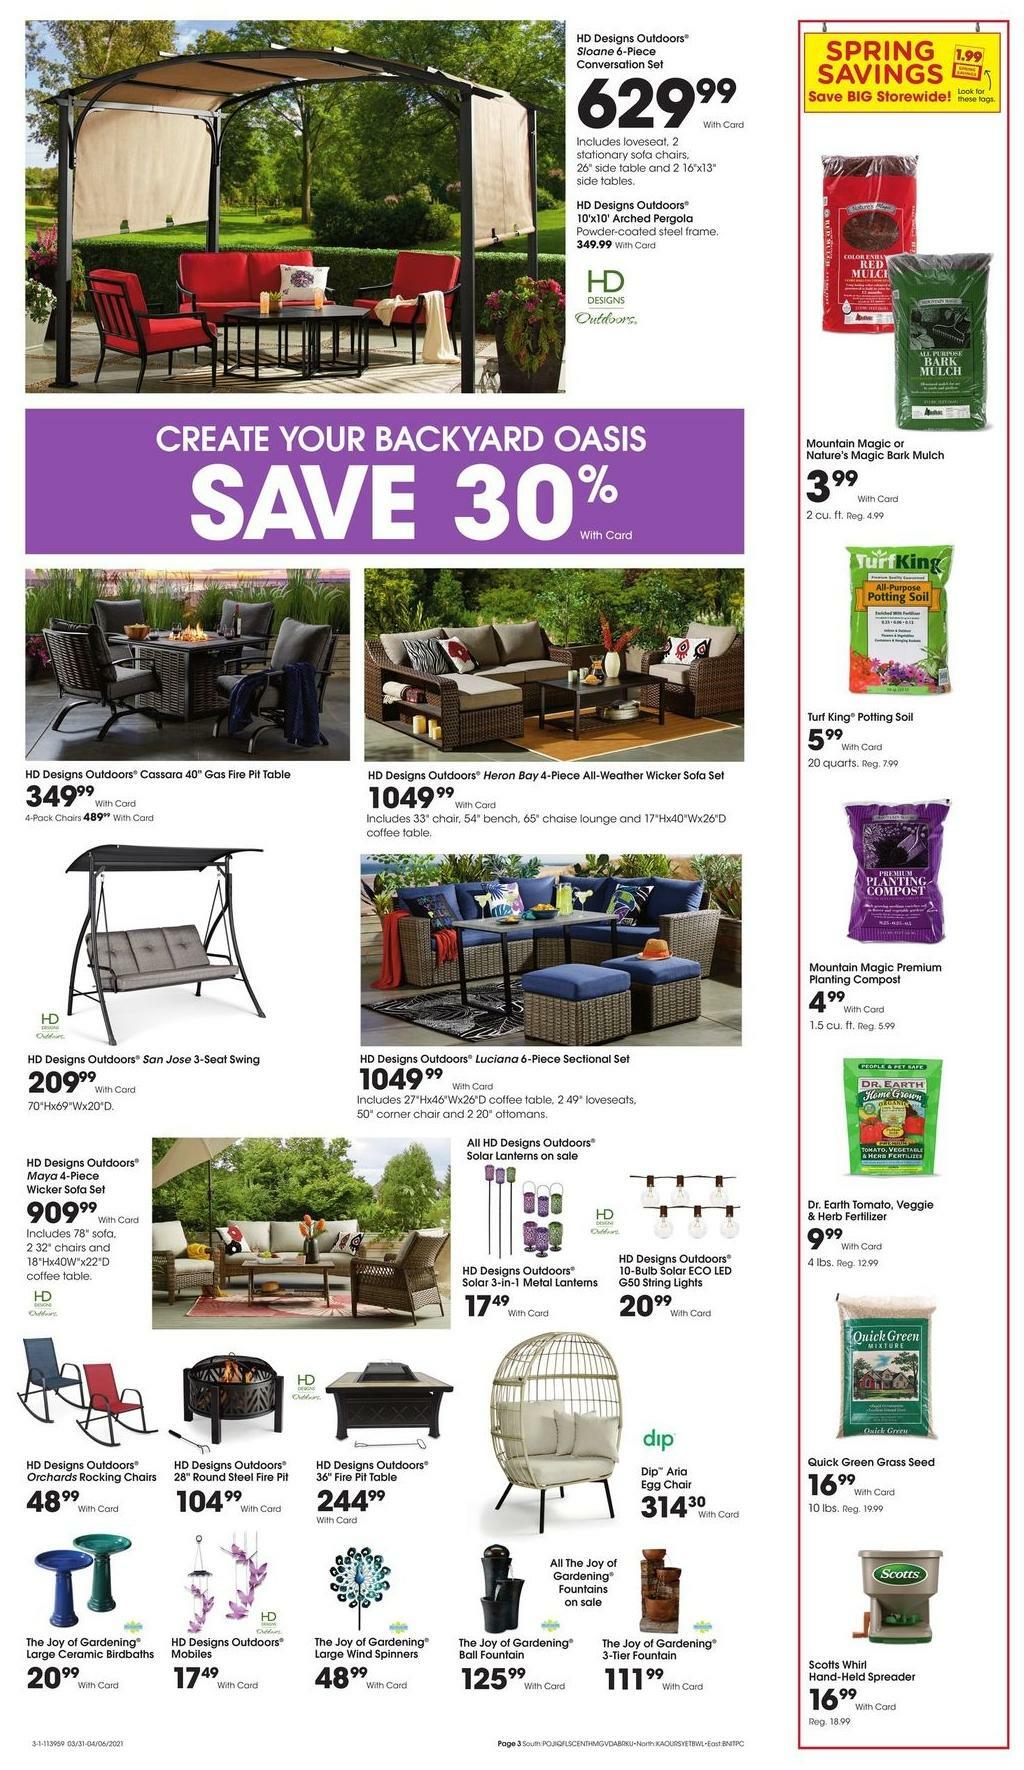 Fred Meyer Garden Weekly Ad from March 31